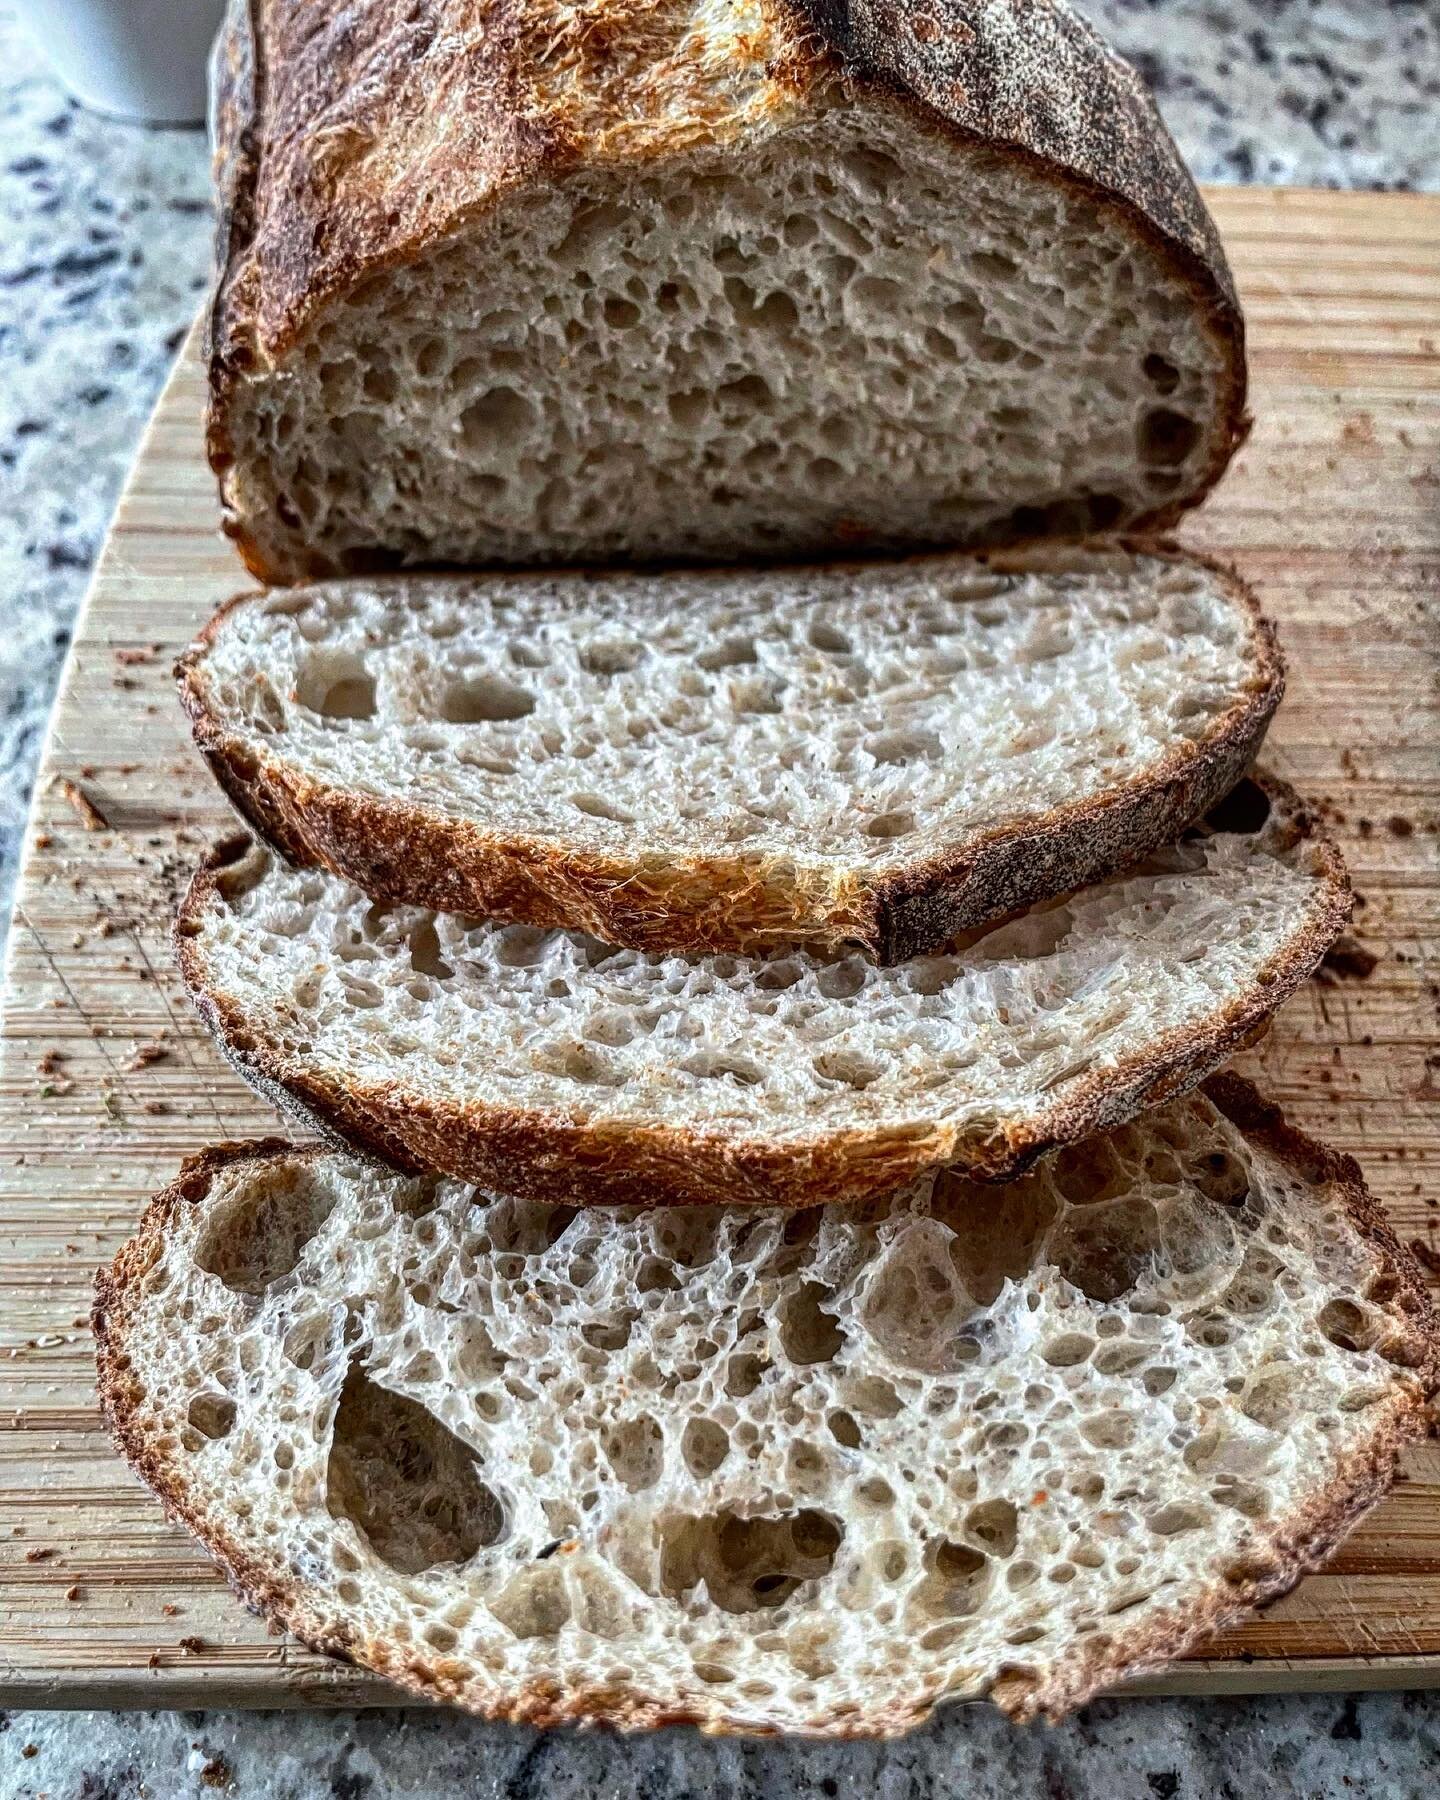 One slice of sourdough has more protein than an egg. Eat real bread, get 💪
.
One medium slice (65g) of sourdough has ~8g of protein. 
.
Hand make your own bread and you&rsquo;ll get a little workout in too.
.
Sustainably Made in Alaska with 100% org